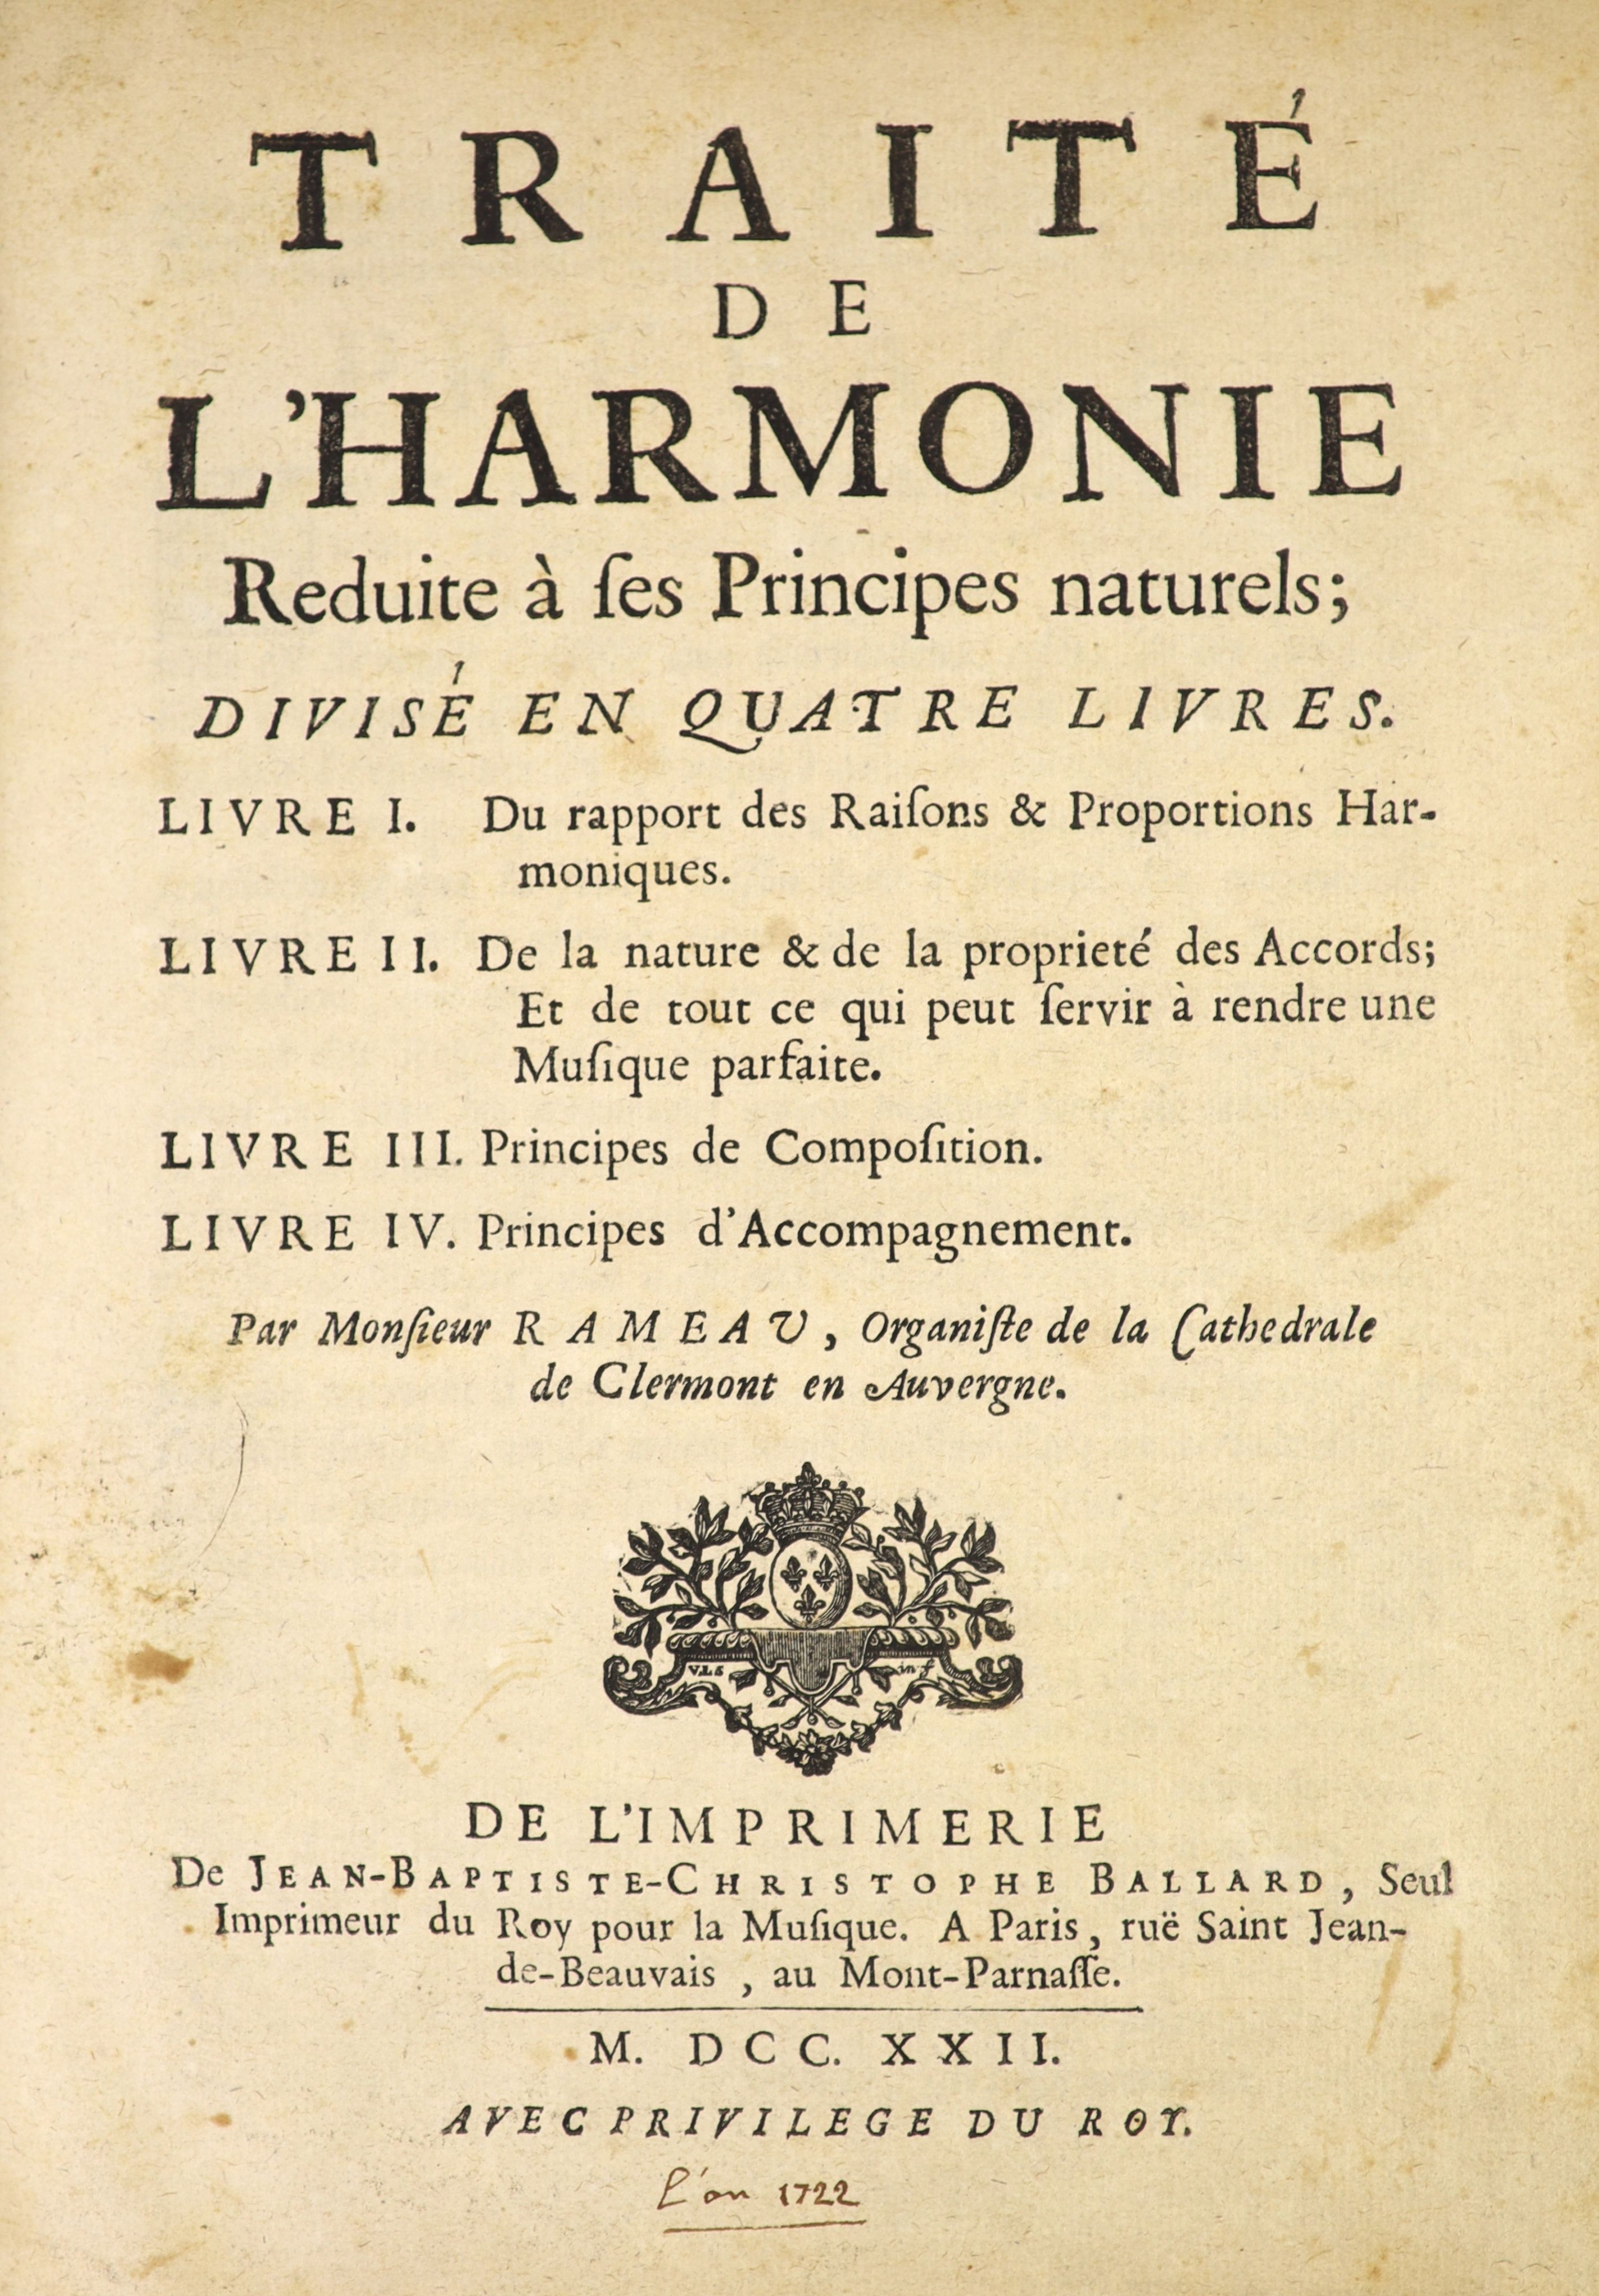 Rameau, John-Philippe - Traite de L’Harmonie Reduite a ses Principes Naturels; Divise en quatre livres… 1st edition 1st edition, complete with numerous examples of annotated music within the text. Old marbled calf, panel